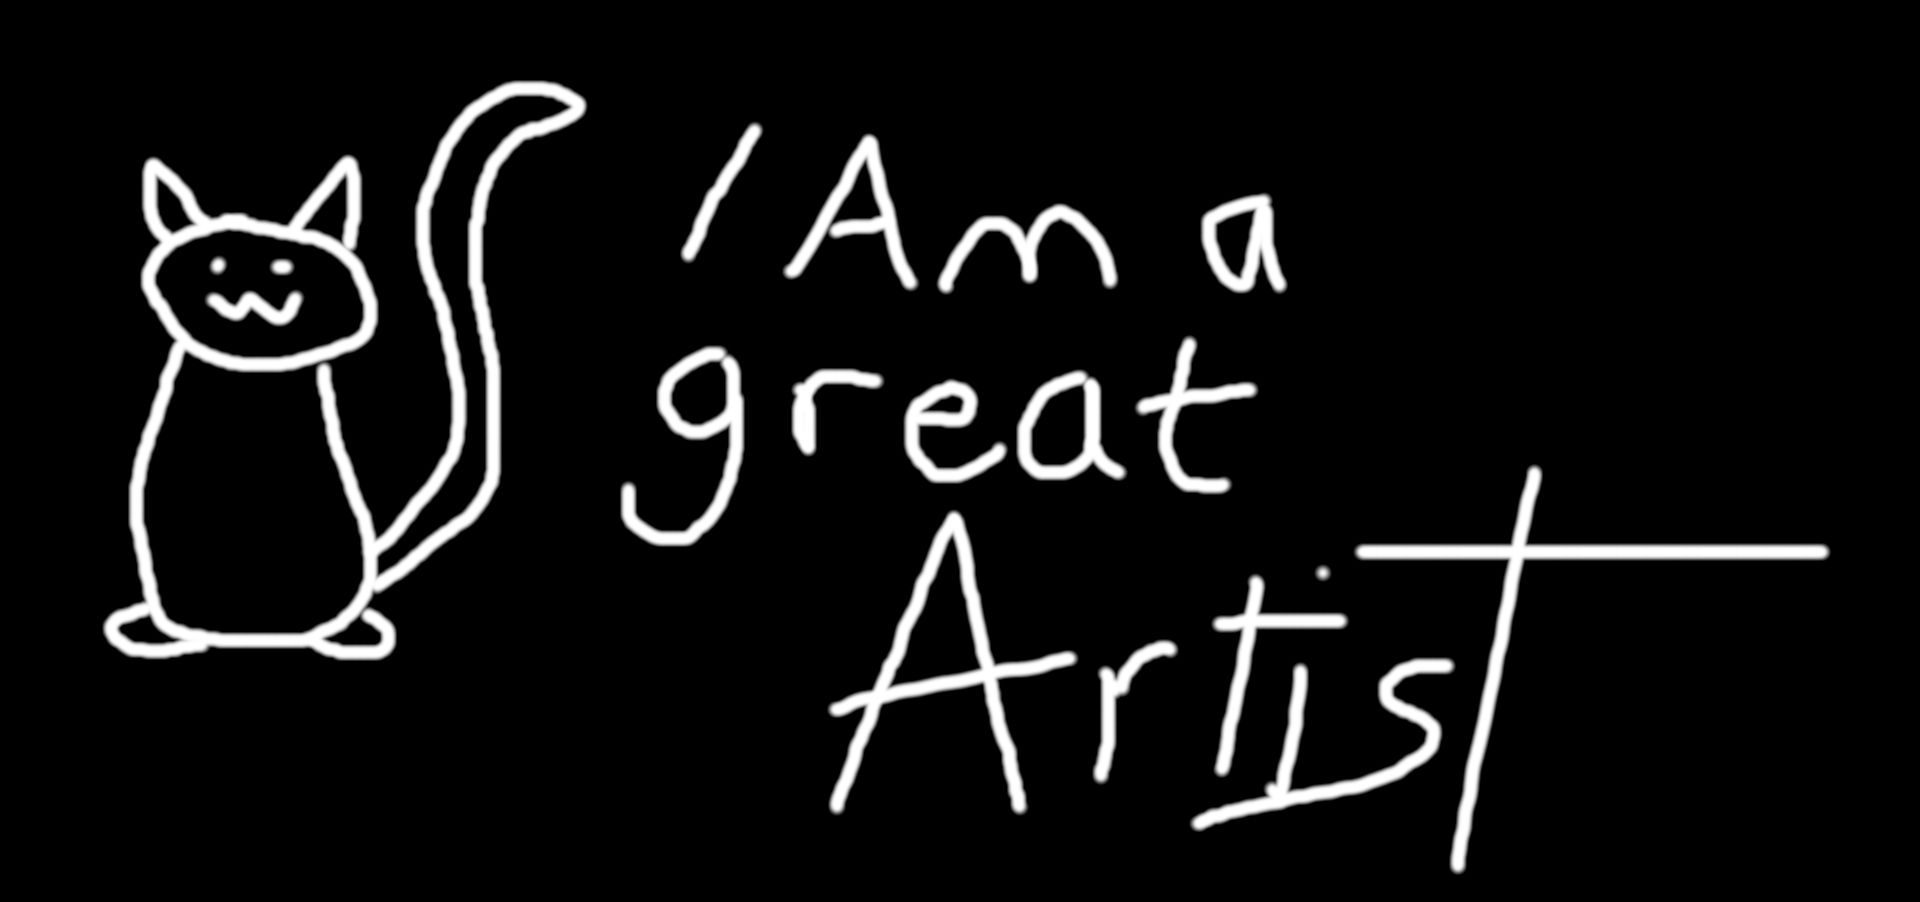 crude image of a cat, with the words, "I am a great artist".